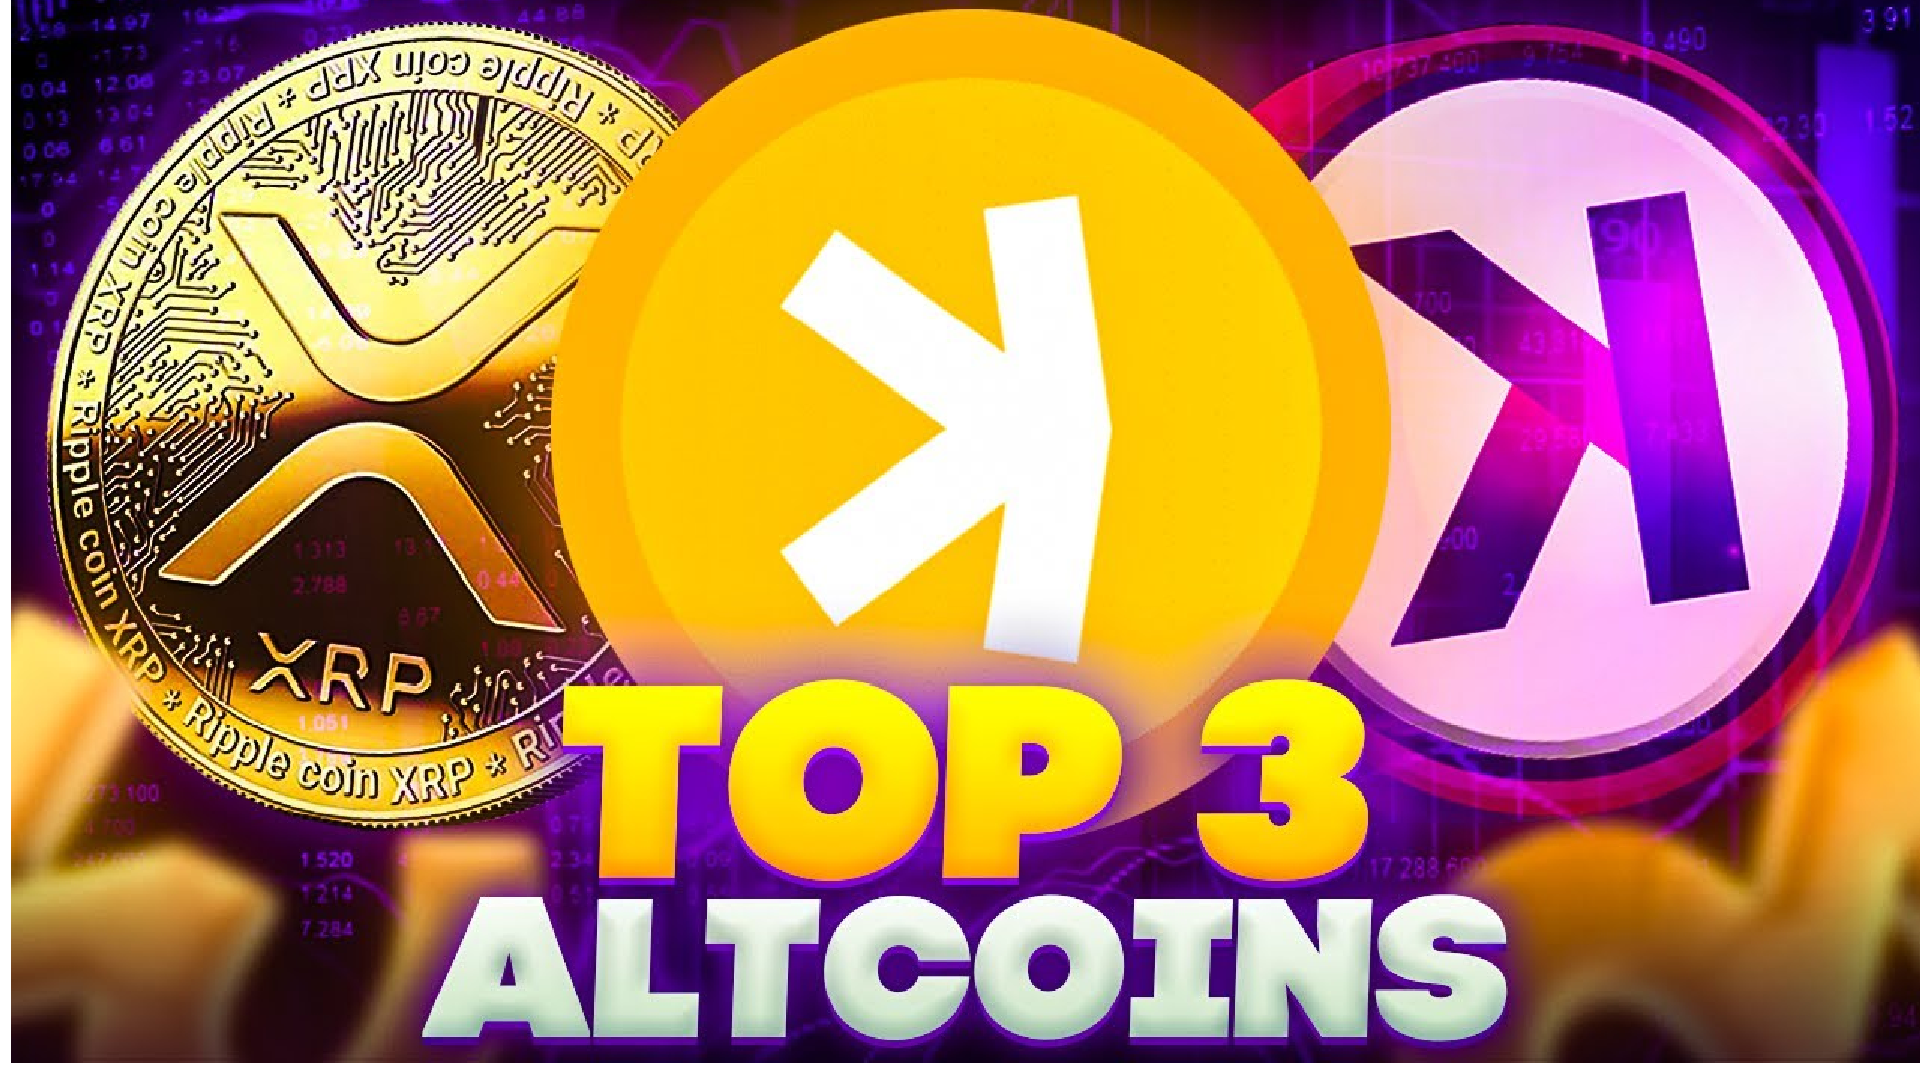 Top 3 Altcoins to Look for in May